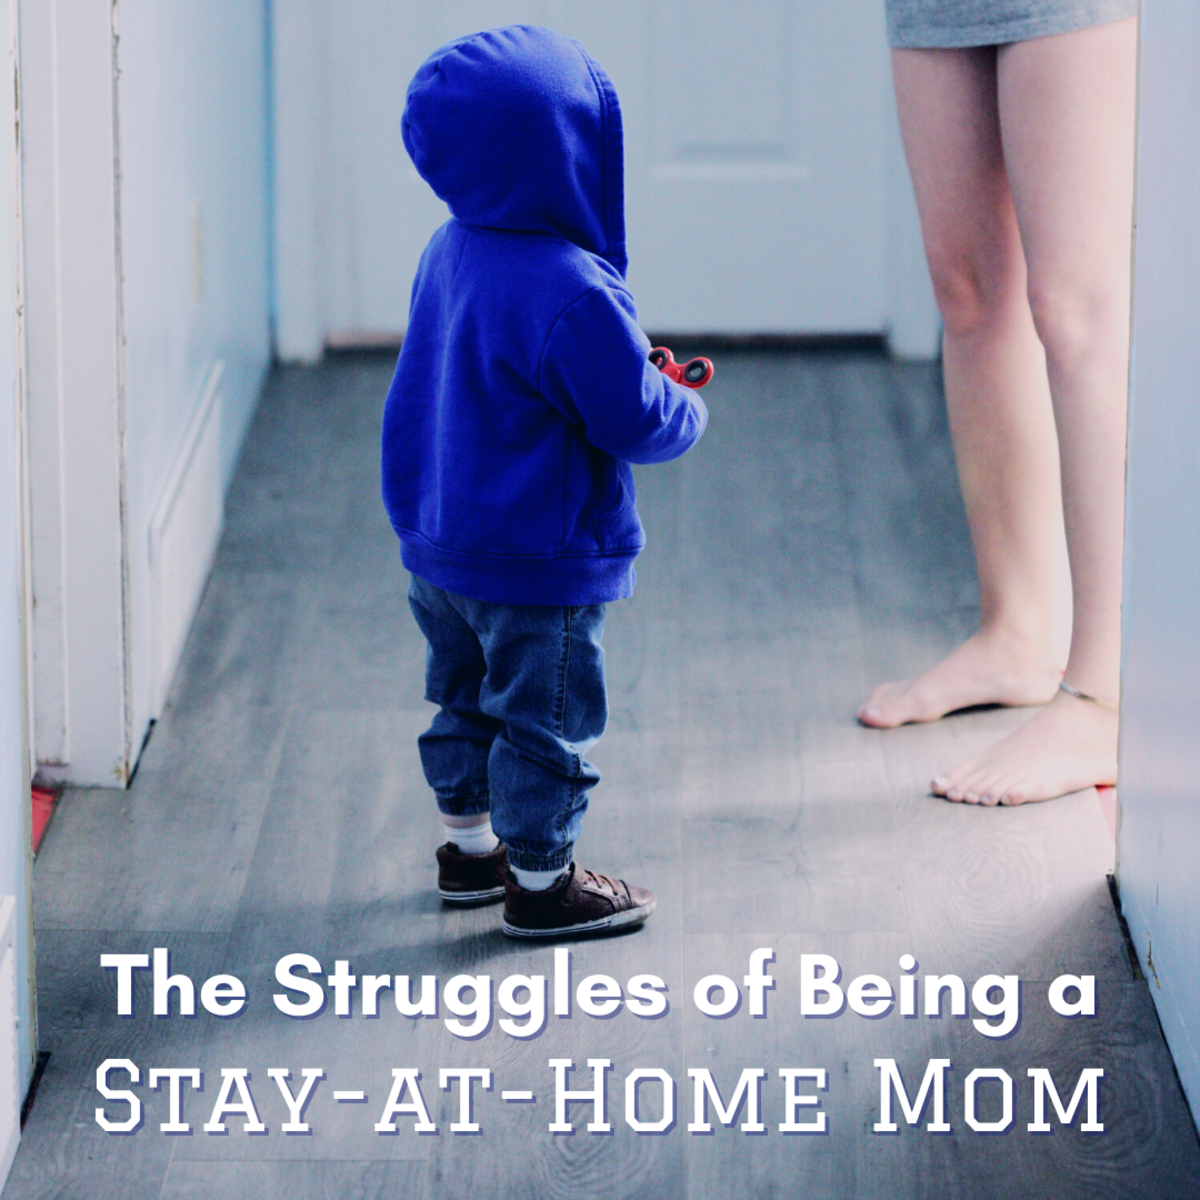 Being a stay-at-home mom is challenging but incredibly rewarding